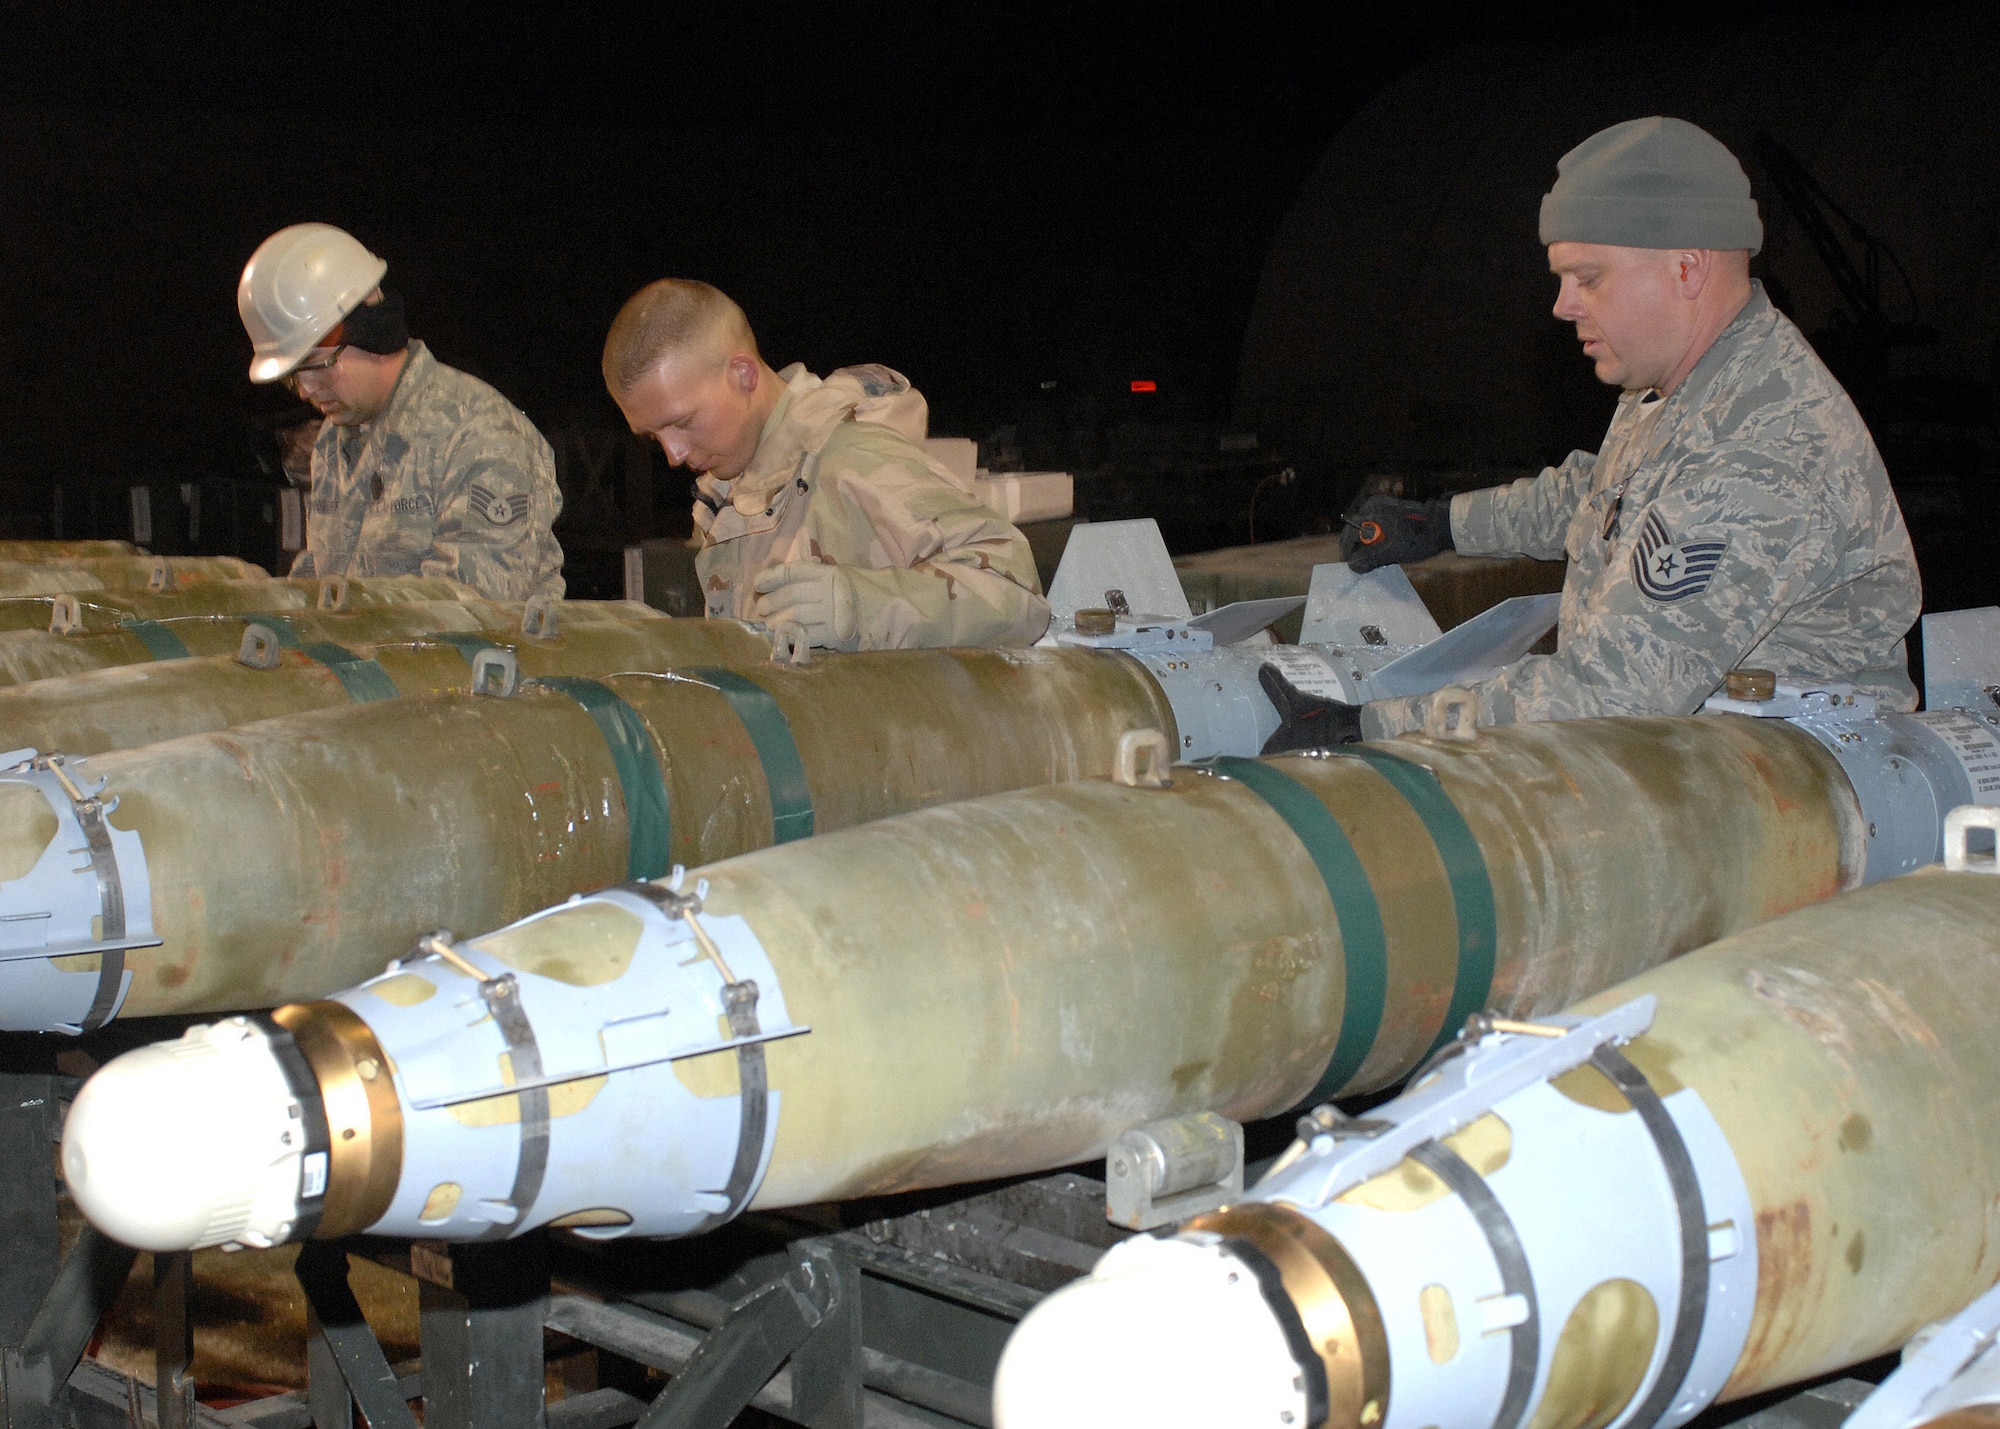 Munitions troops with the 455th Expeditionary Maintenance Squadron assemble guided bomb unit-38 bombs during the night shift Feb 14 at Bagram Air Base, Afghanistan. The bombs will be loaded onto F-15 Strike Eagles for missions in support of the war on terrorism. The Airmen are (left to right) Staff Sgt. Jeremy Woodruff,  Airman 1st Class Zack Demeter and Tech. Sgt. Ben Walker. Sergeant Woodruff is from the 375th Logistic Readiness Squadron, Scott Air Force Base, Ill.,  Airman Demeter is from the 52nd Equipment Maintenance Squadron, Spangdahlem Air Base, Germany, and Sergeant Walker is form the 4th Equipment Maintenance Squadron, Seymour Johnson Air Force Base, N.C. (U.S. Air Force photo/Master Sgt. Demetrius Lester) 